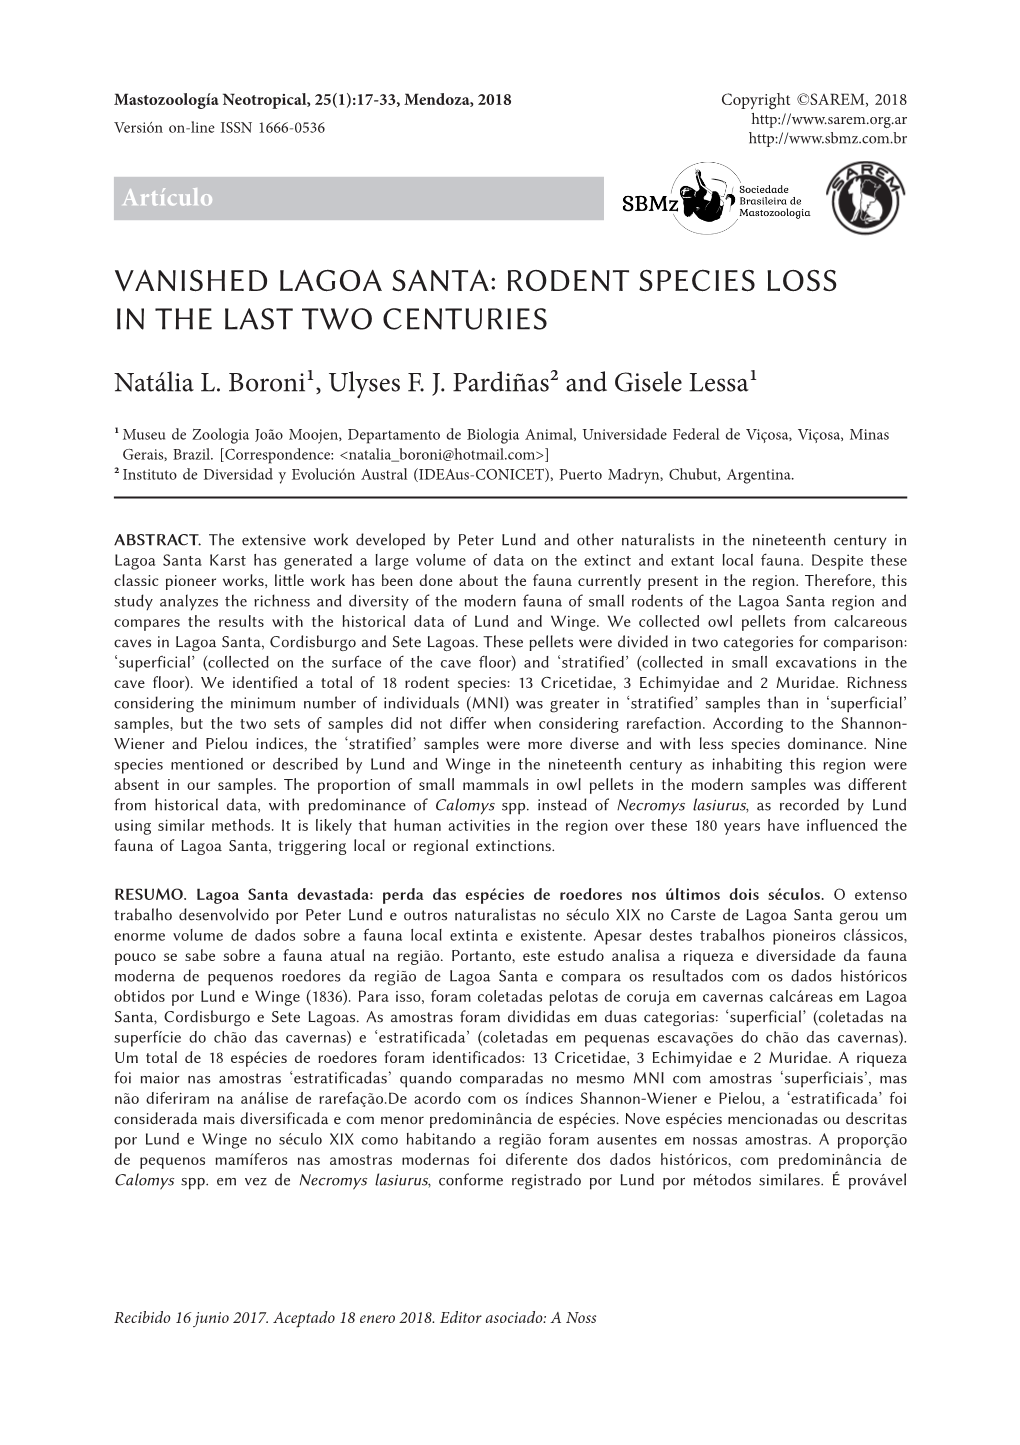 Vanished Lagoa Santa: Rodent Species Loss in the Last Two Centuries